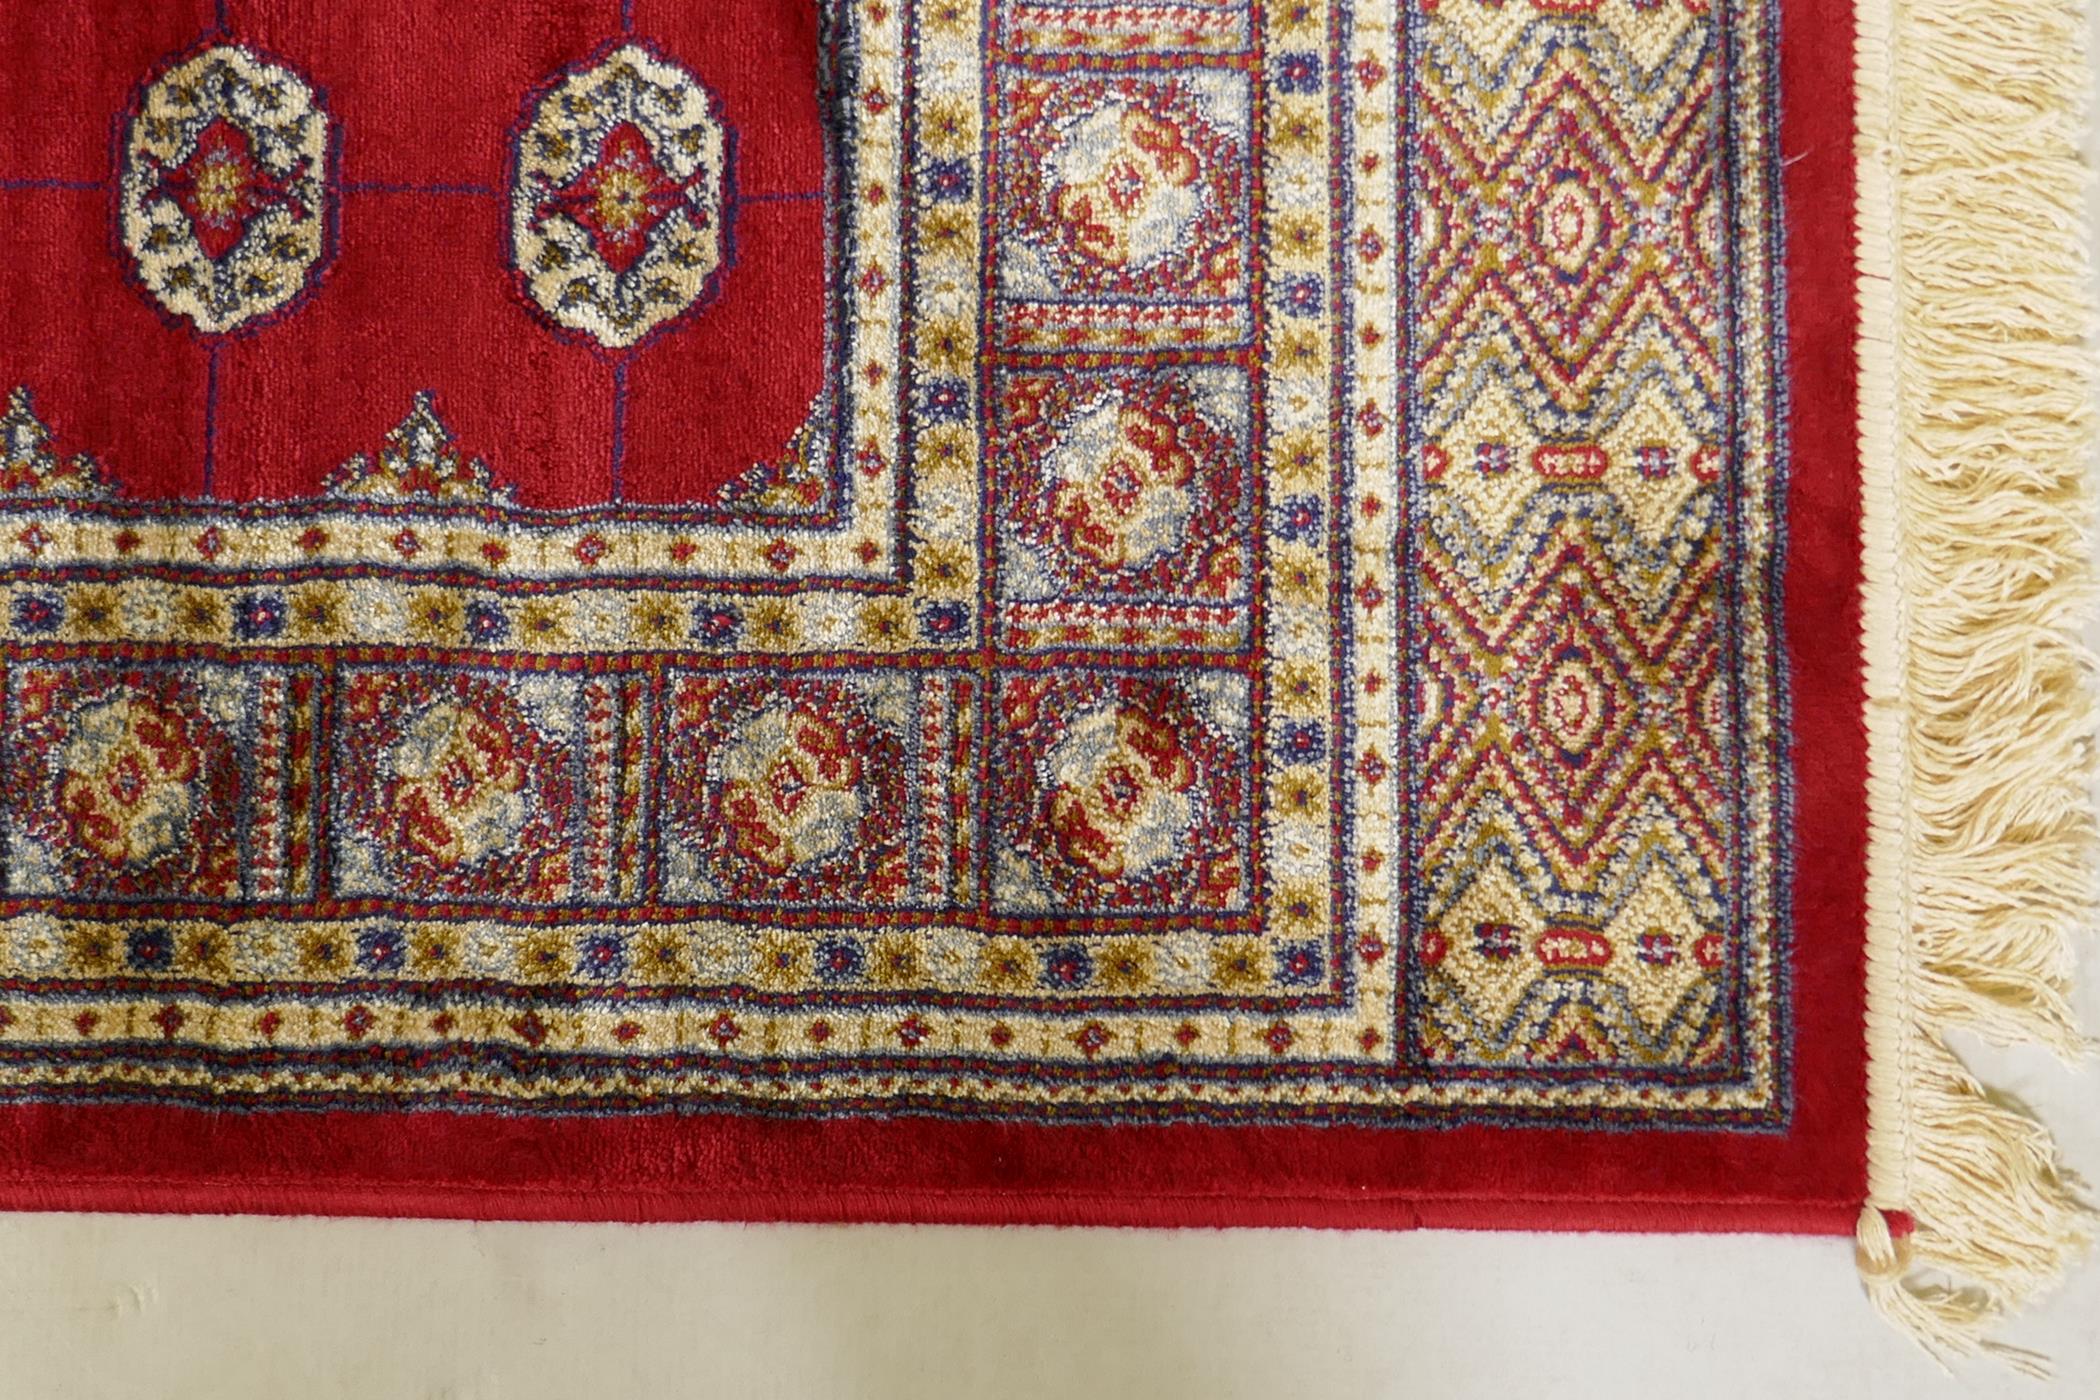 A rich red ground Kashmir rug with a Bokhara design, 47" x 69" - Image 5 of 6